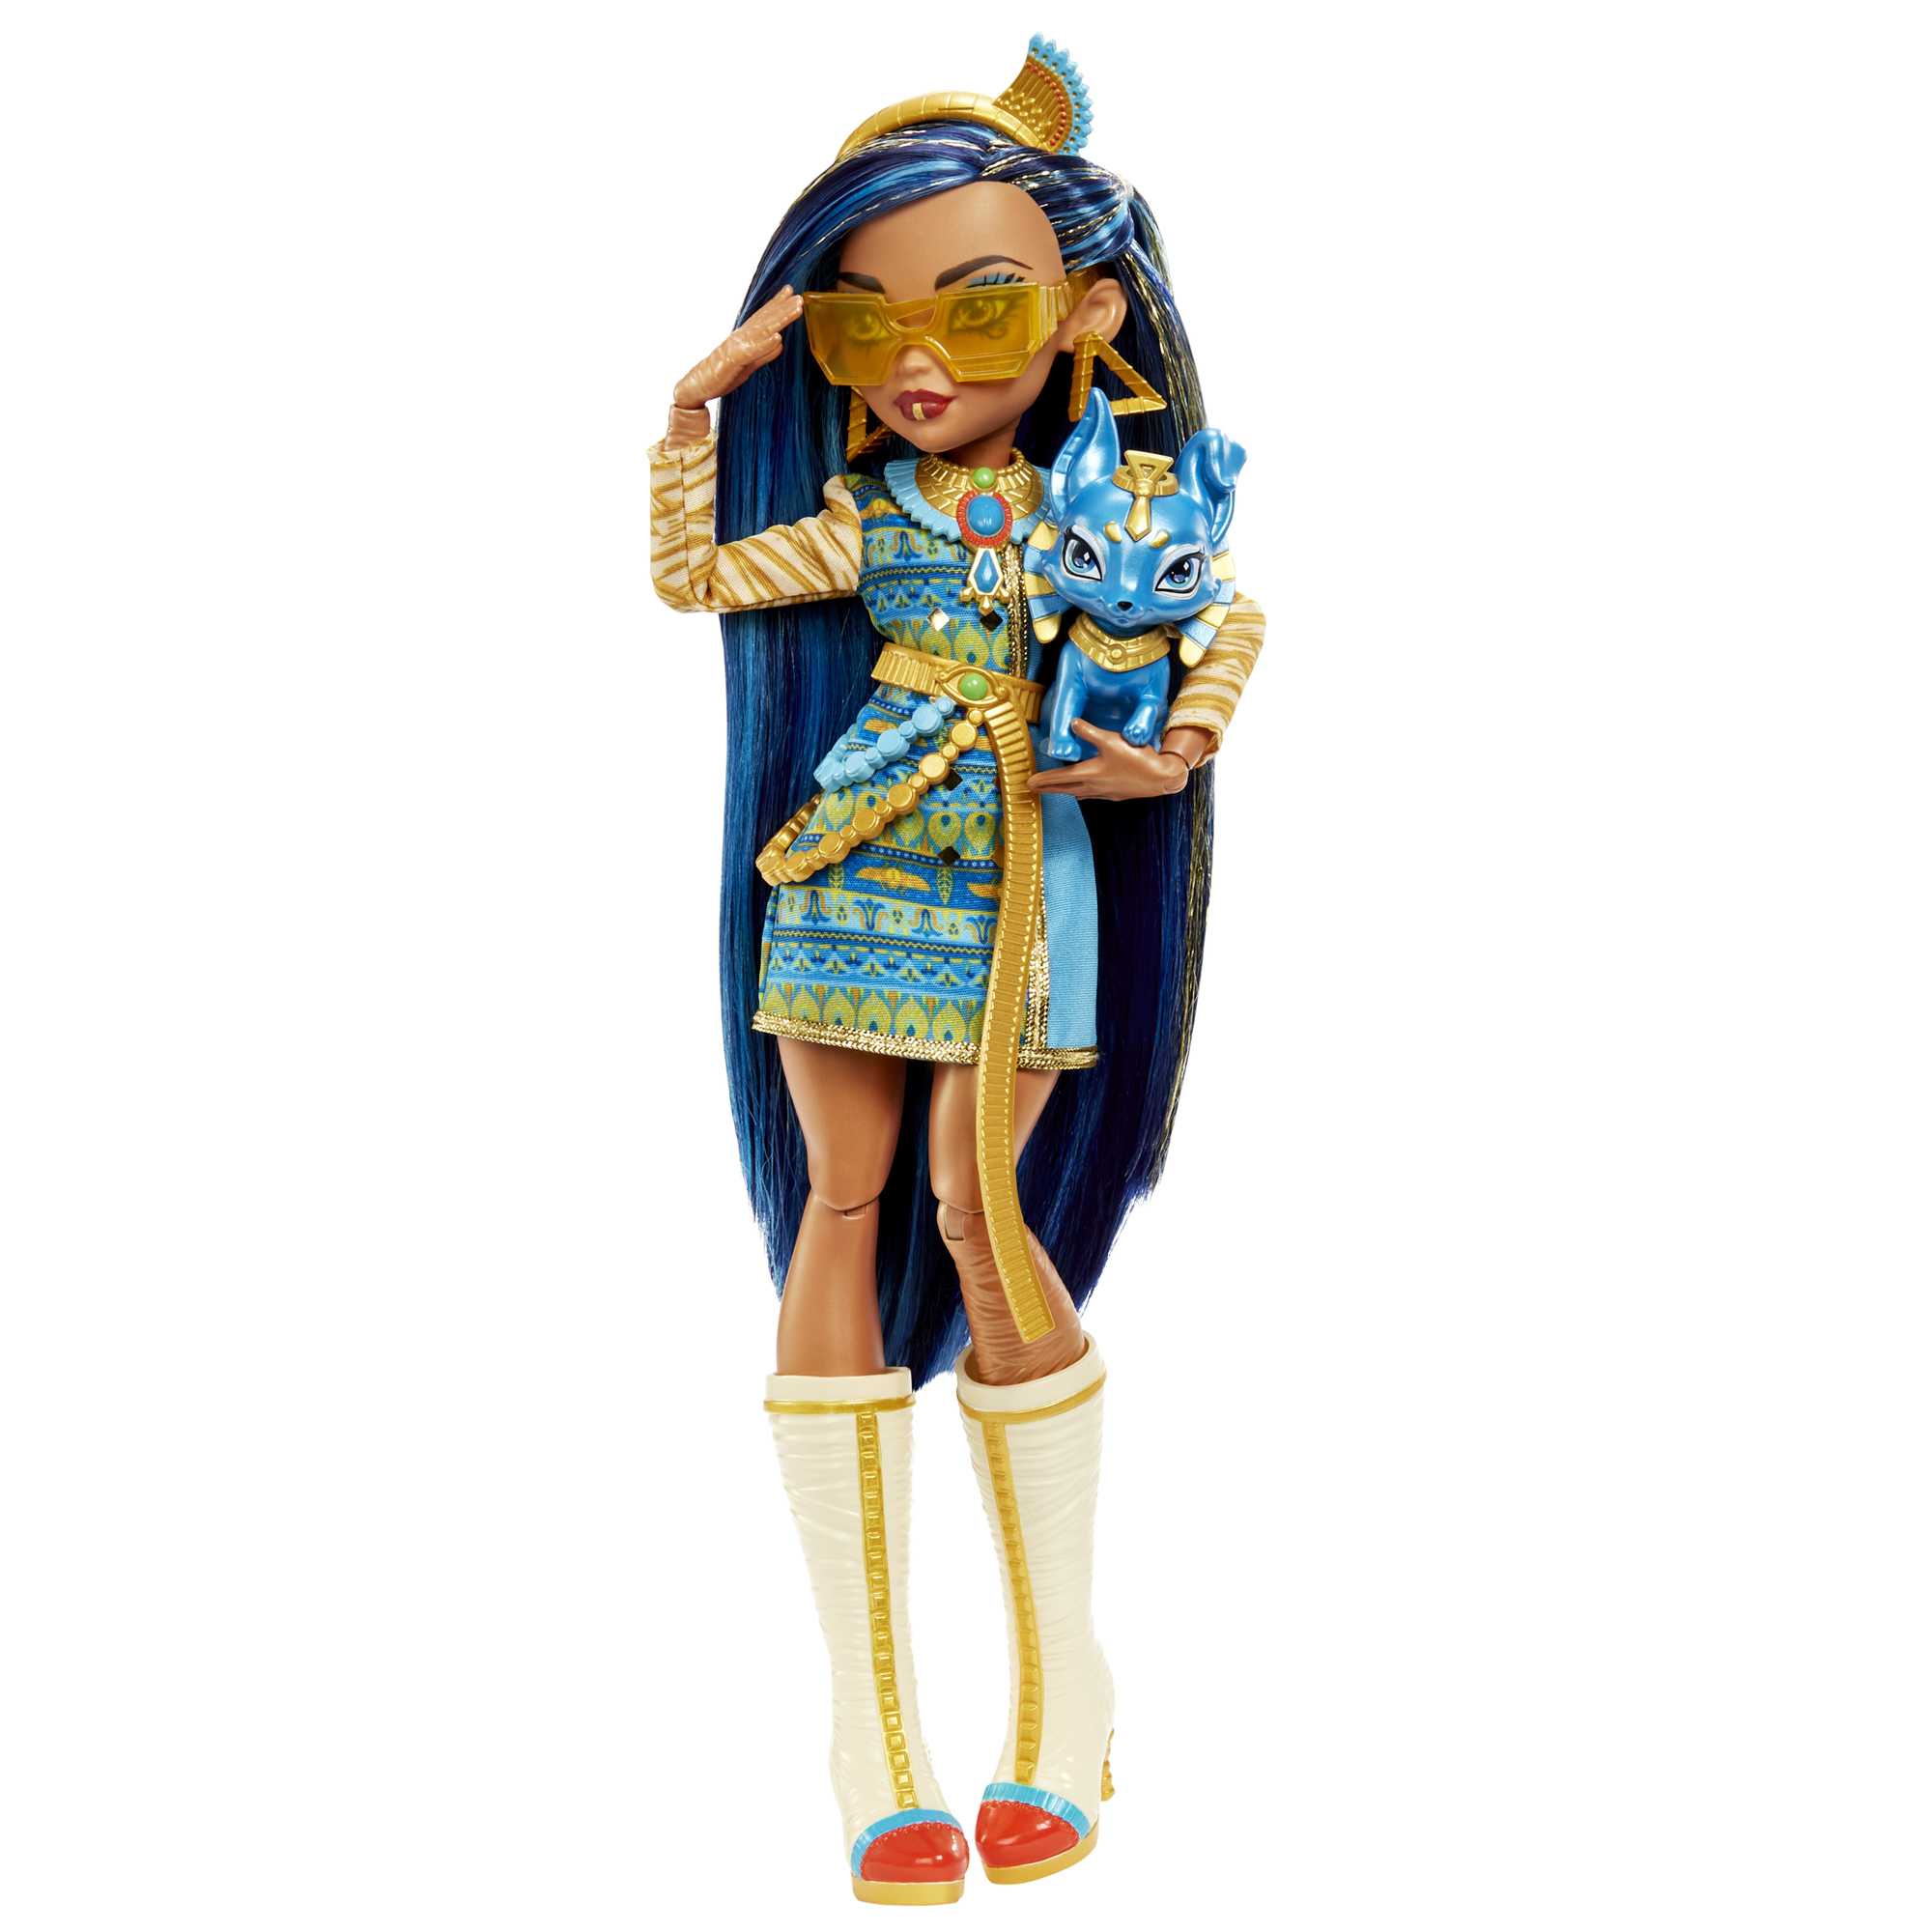 MONSTER HIGH WELCOME TO MONSTER HIGH CLEO DE NILE DOLL